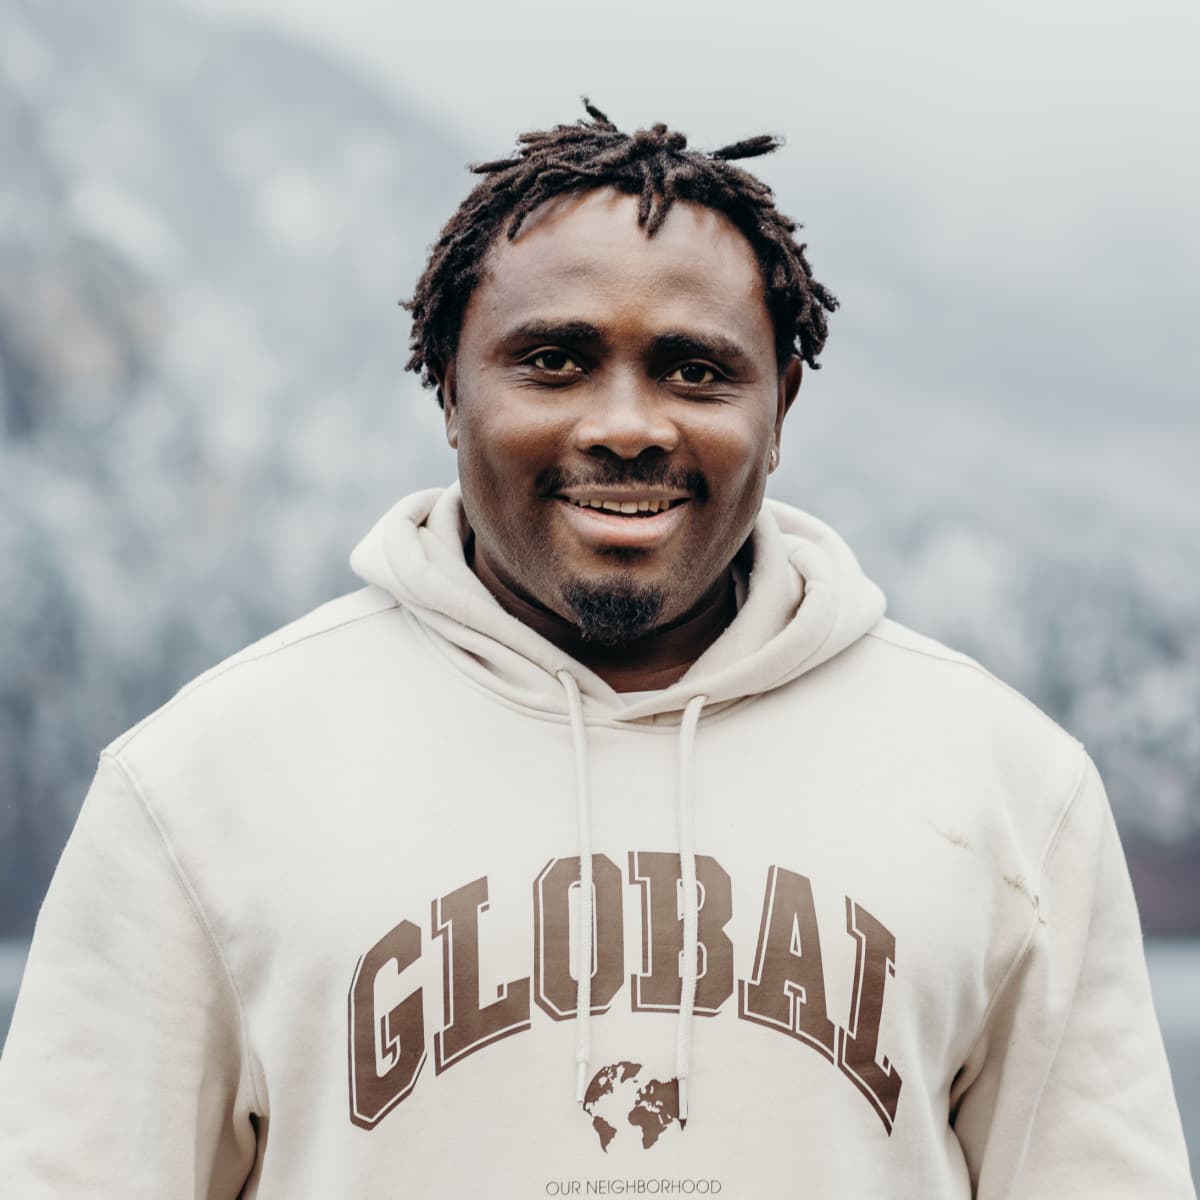 Black man with short dreads in hooded sweatshirt smiles in front of alpine mountain